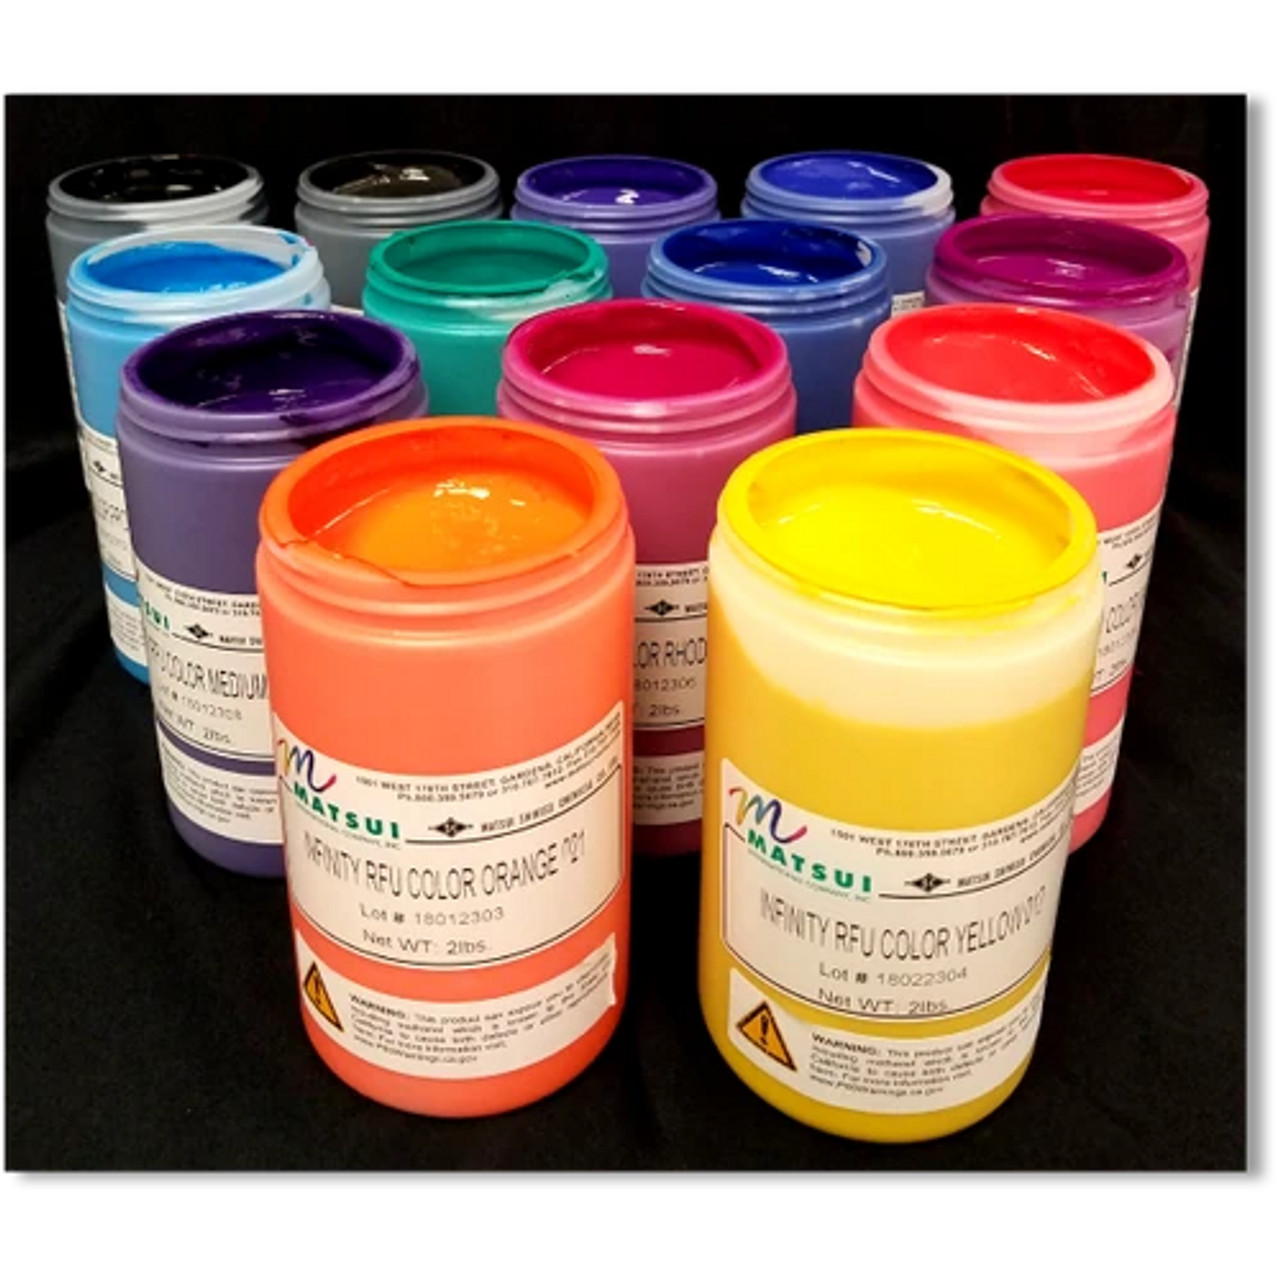 Matsui Infinity Water-Based Pigments